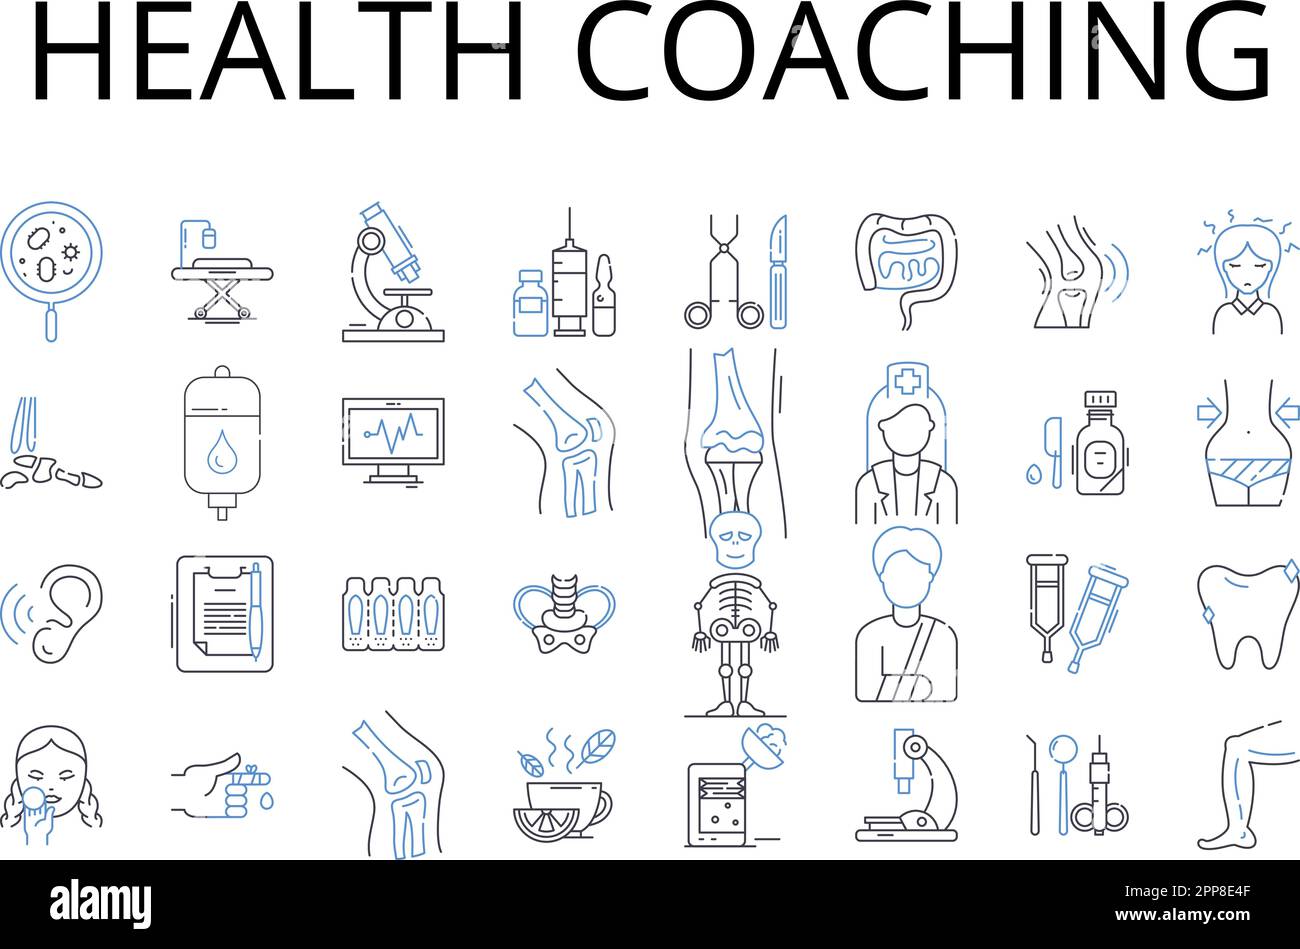 Health coaching line icons collection. Wellness coaching, Personal training, Fitness guidance, Nutrition coaching, Lifestyle coaching, Health Stock Vector